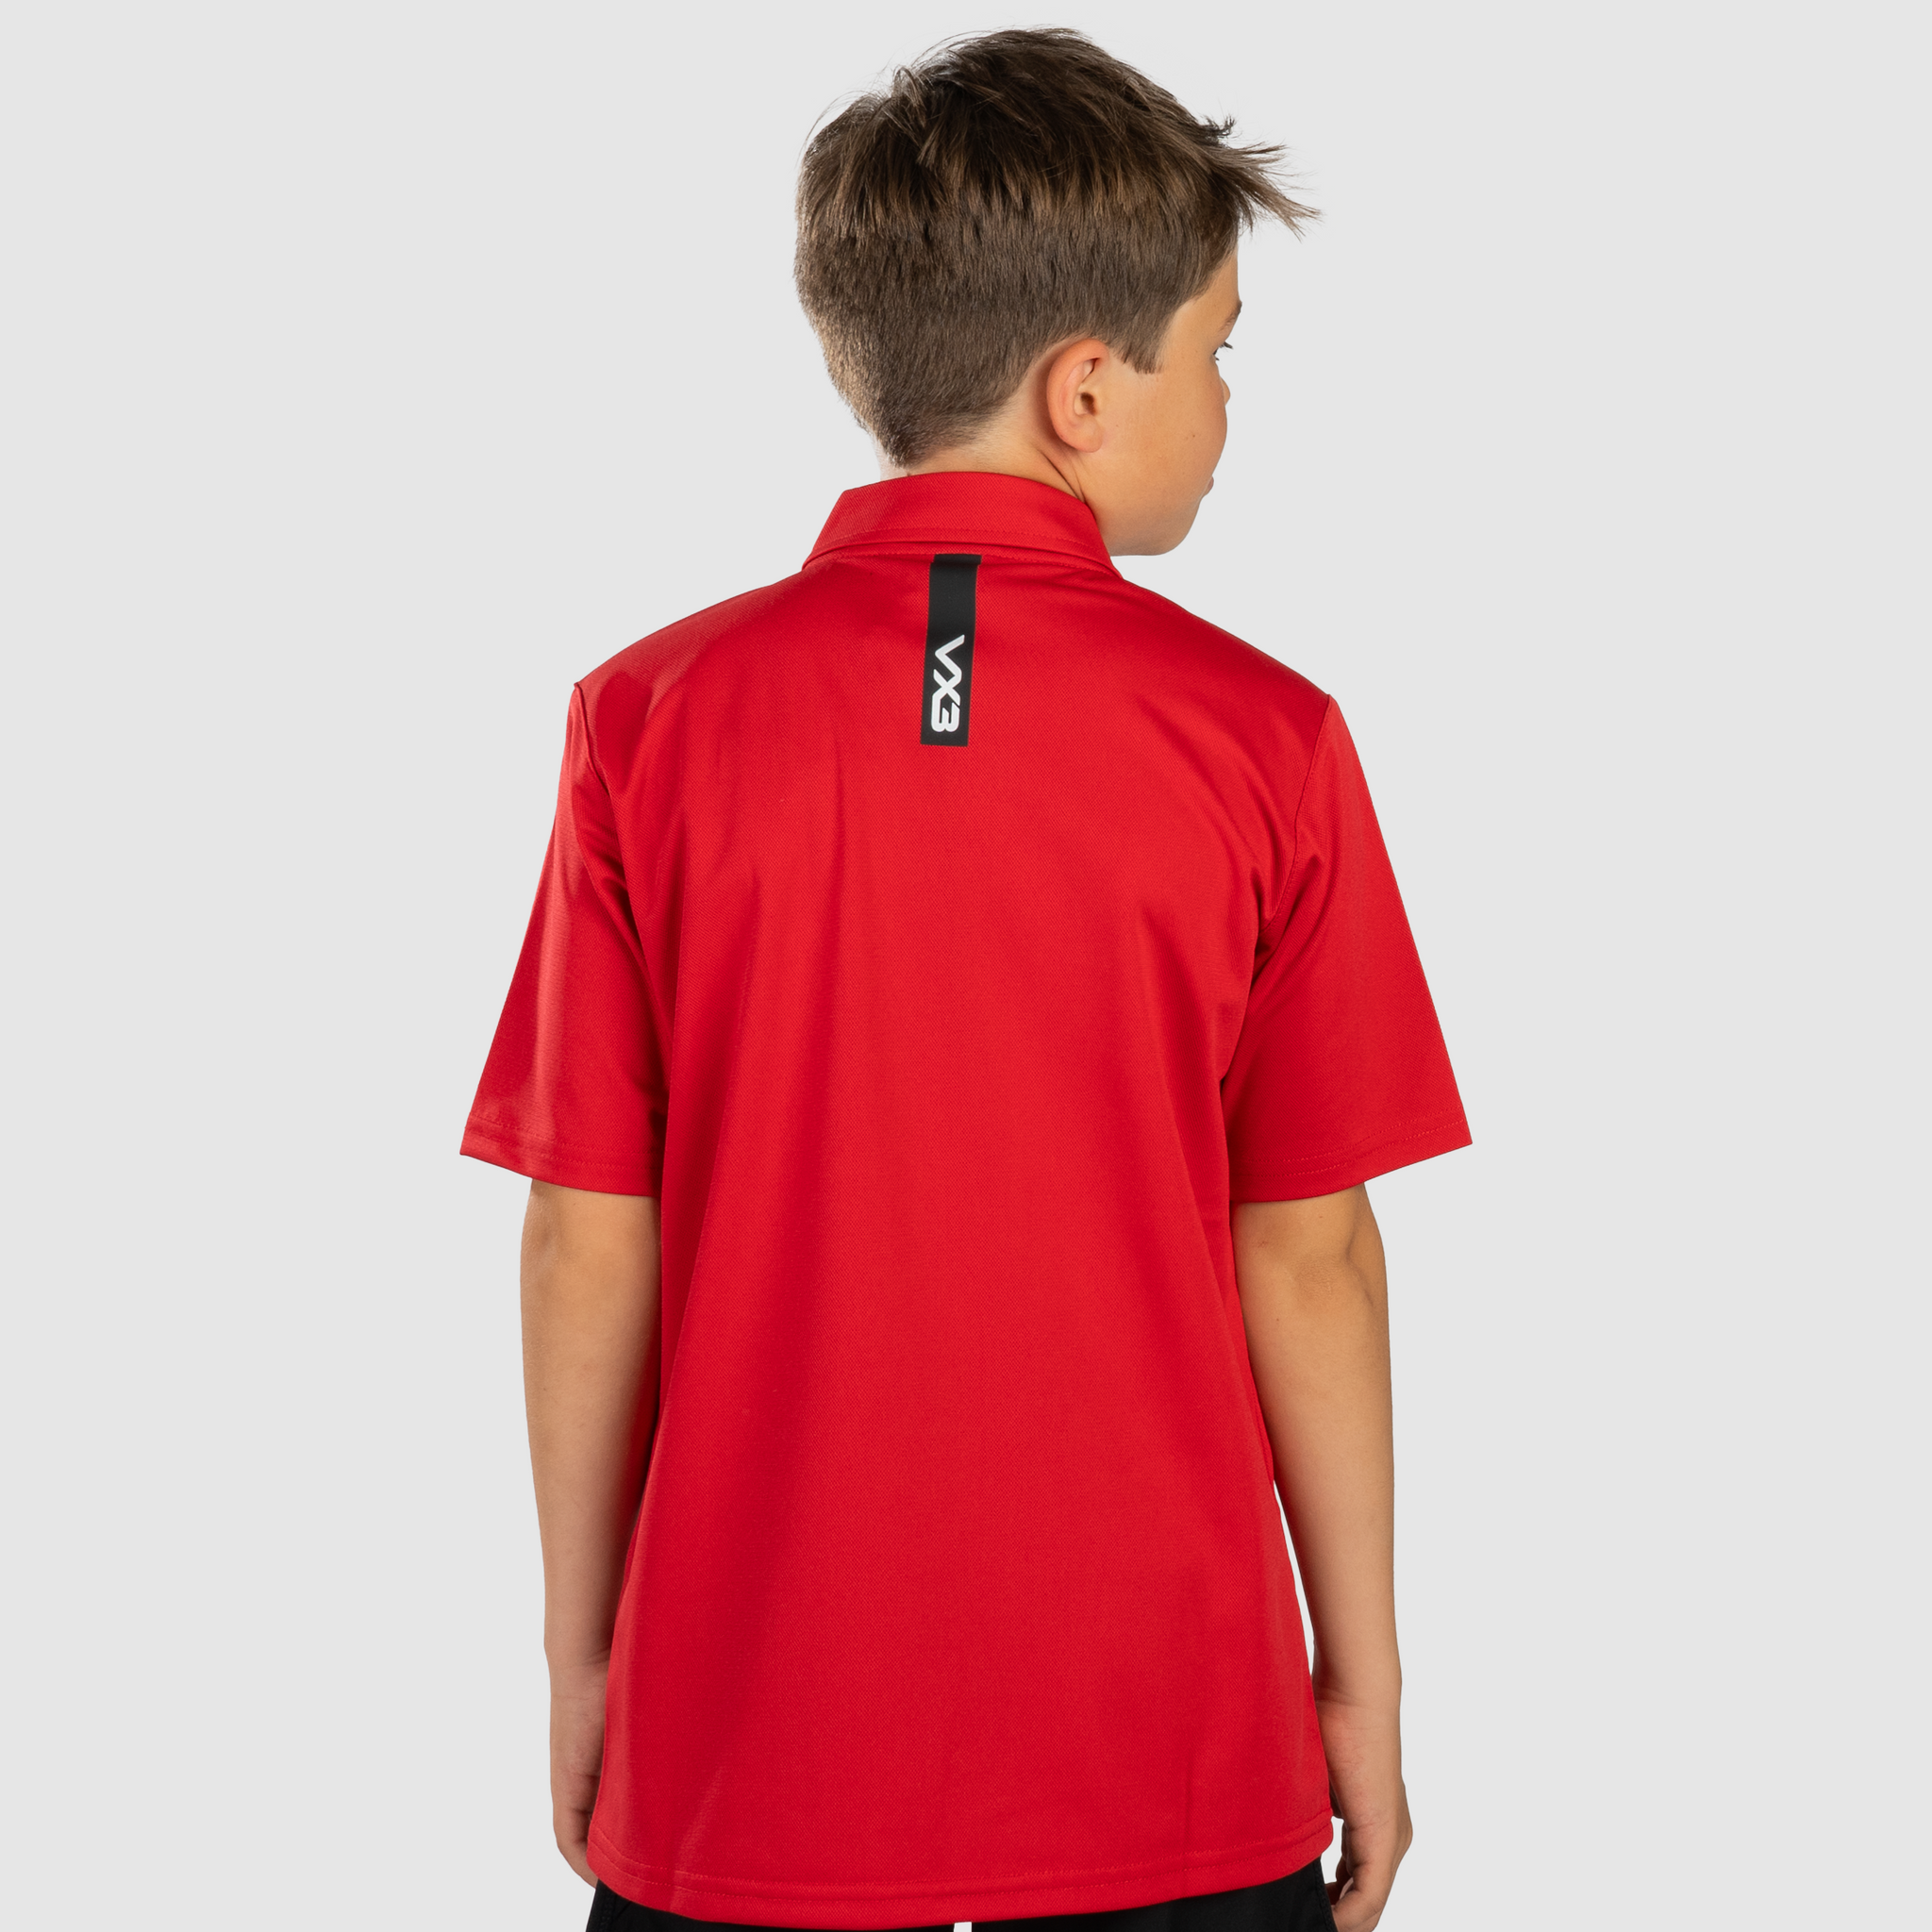 Fortis Youth Polo Red/Black